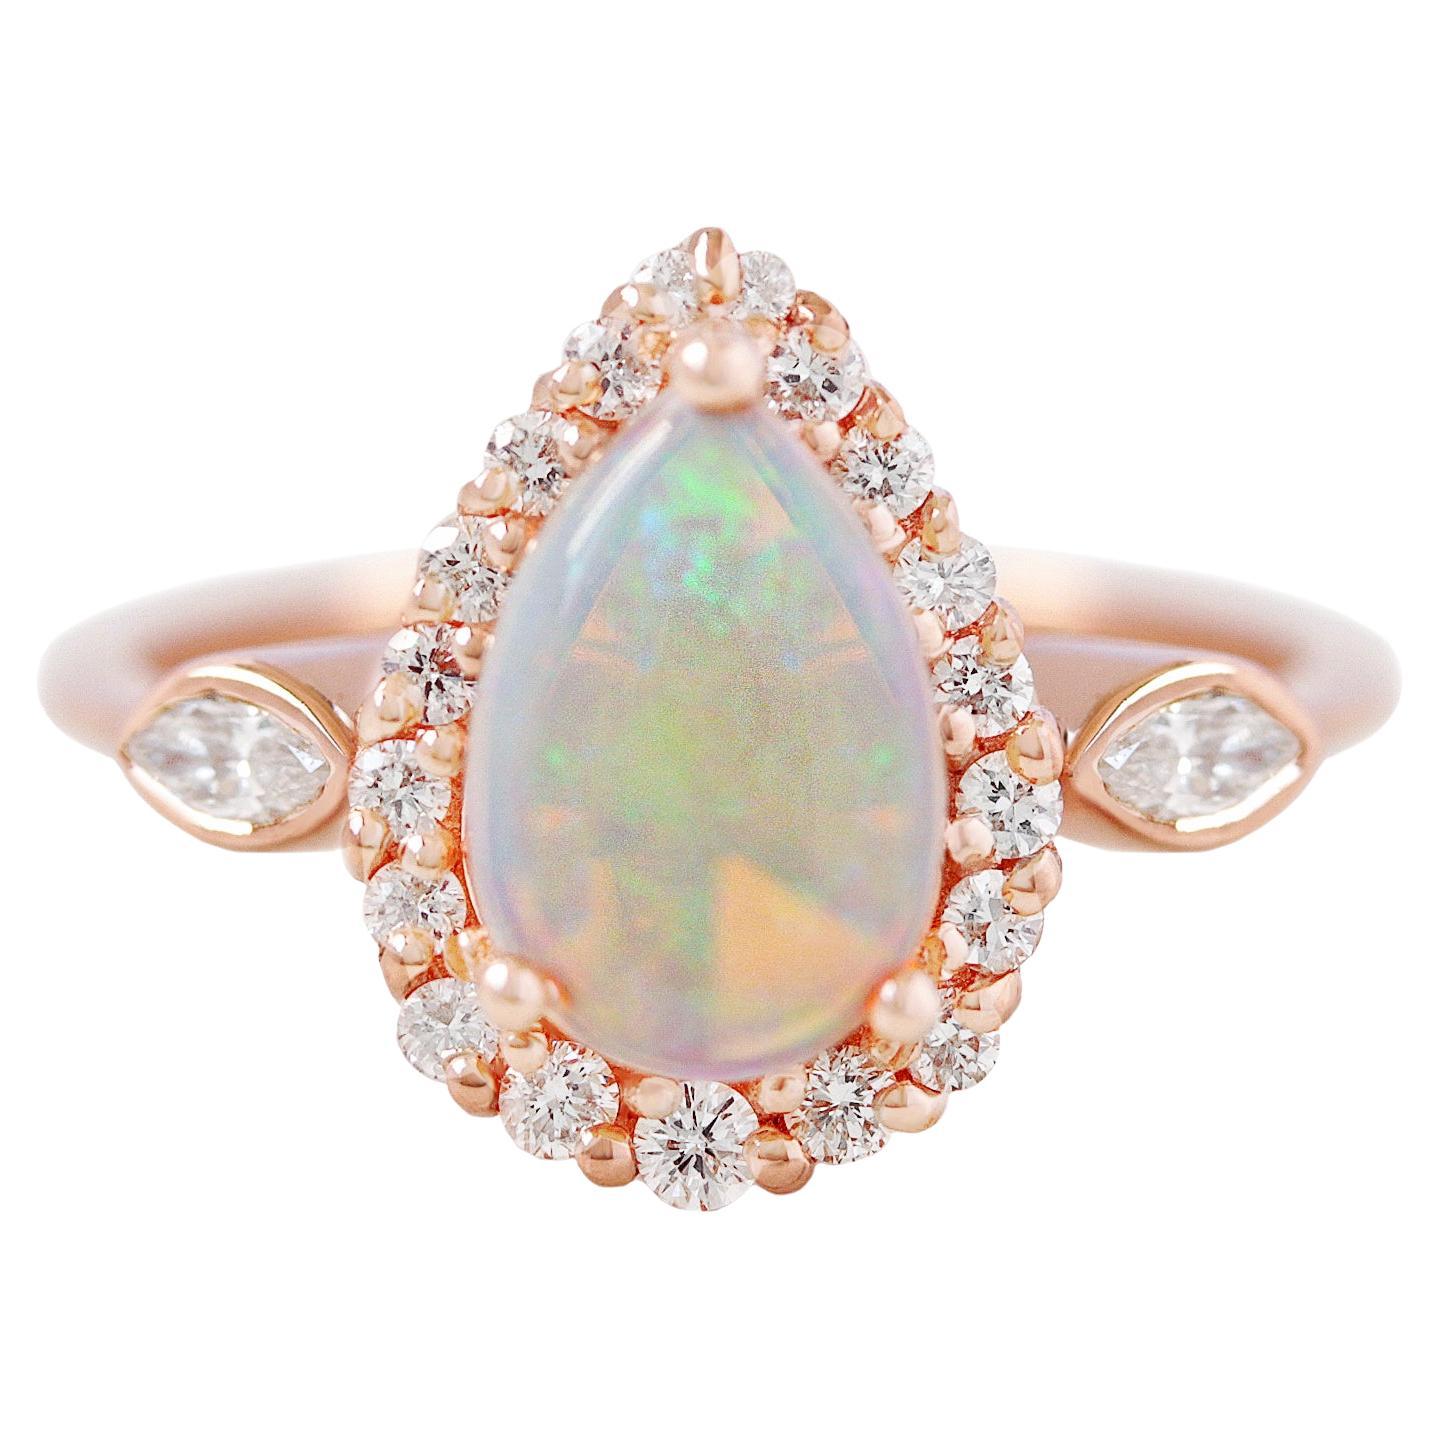 Pear Opal and Diamond Halo Unique Victorian Vintage Inspired Engagement Ring Zoe